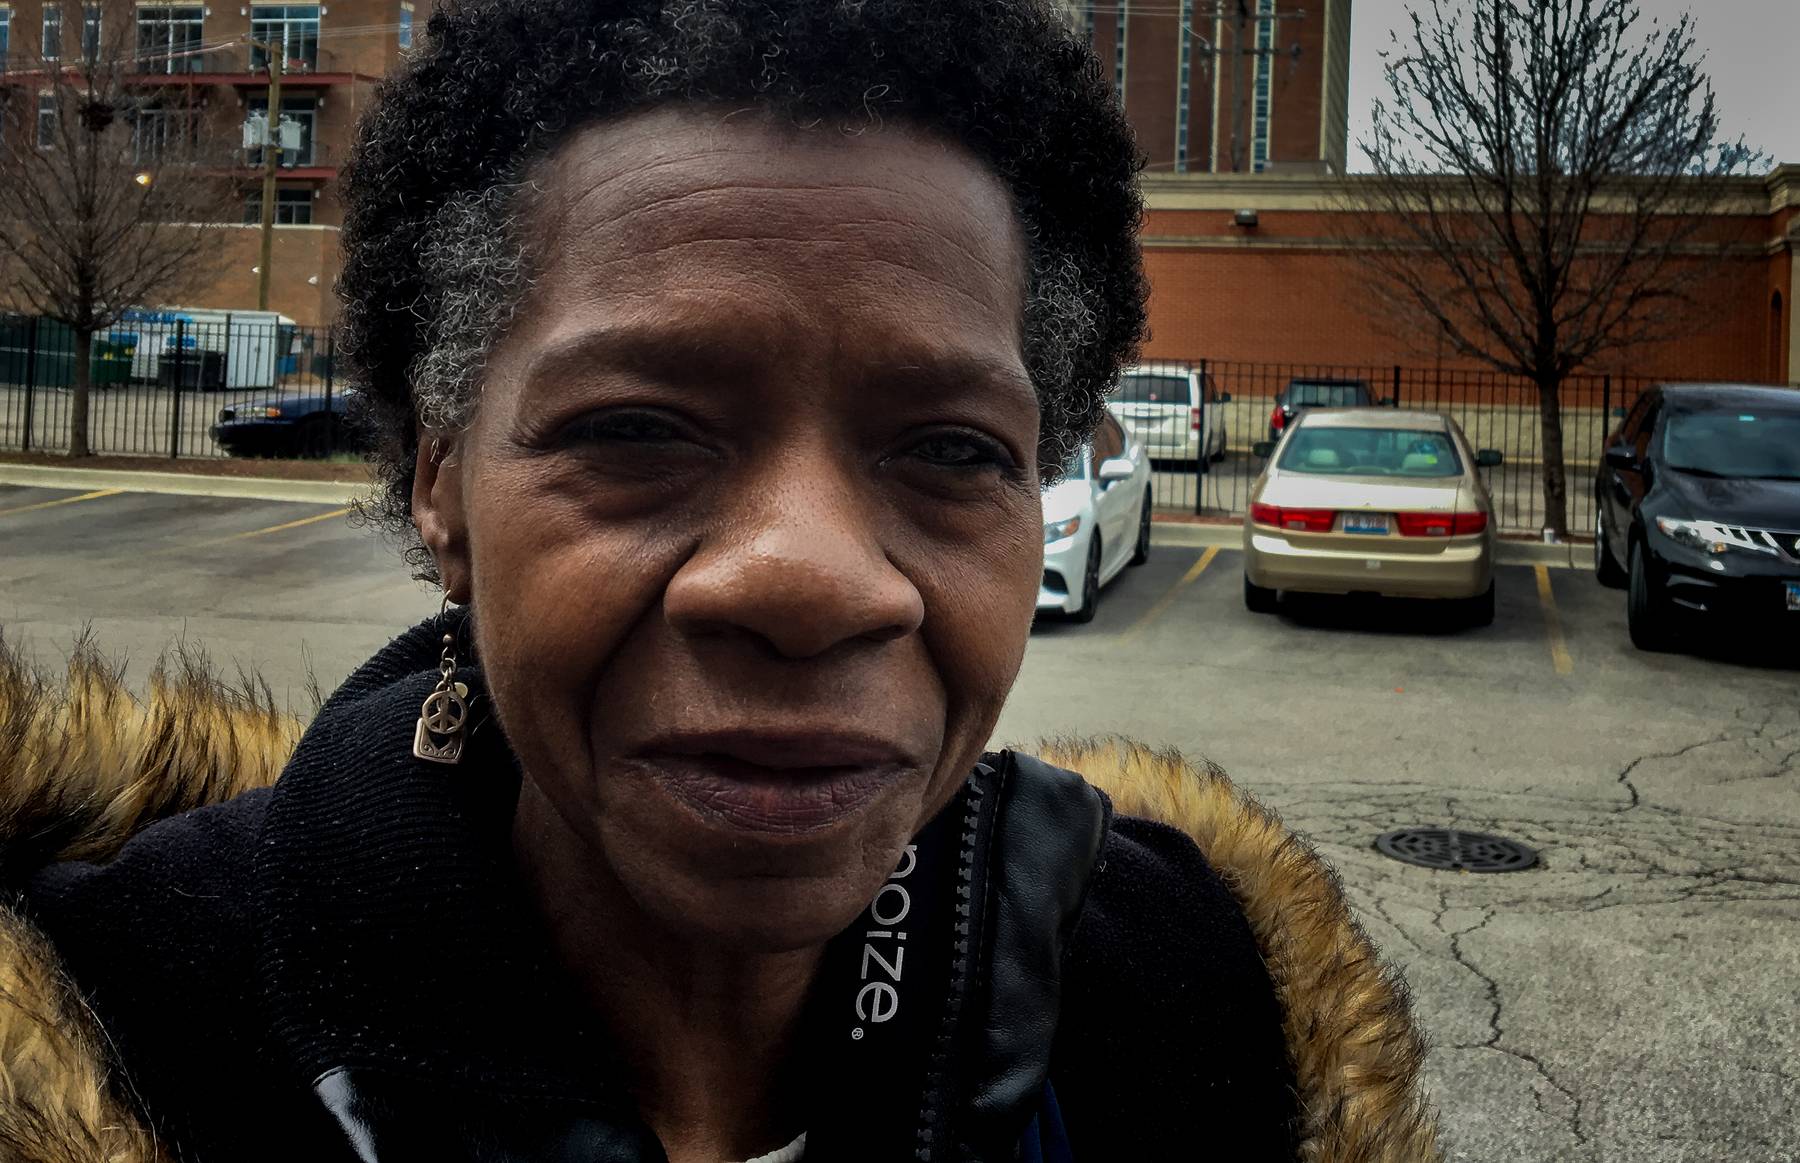 Jacqueline Cobbins, a tenant on the 20th floor of Patrick Sullivan Apartments on the Near West Side, said she complains weekly about elevators in her building being broken.